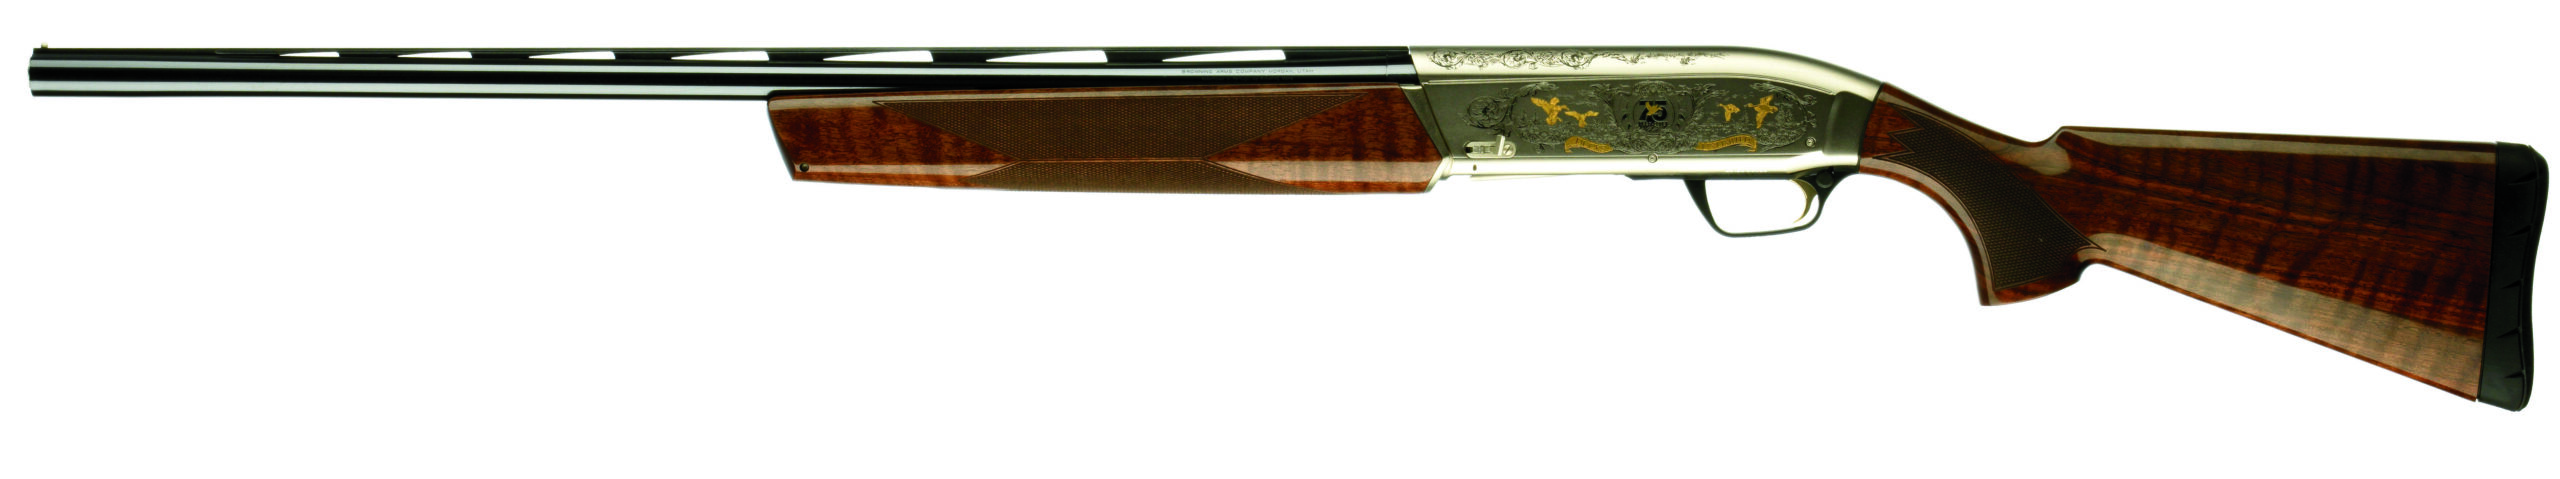 Browning's Maxus took DU's 75th anniversary honors.